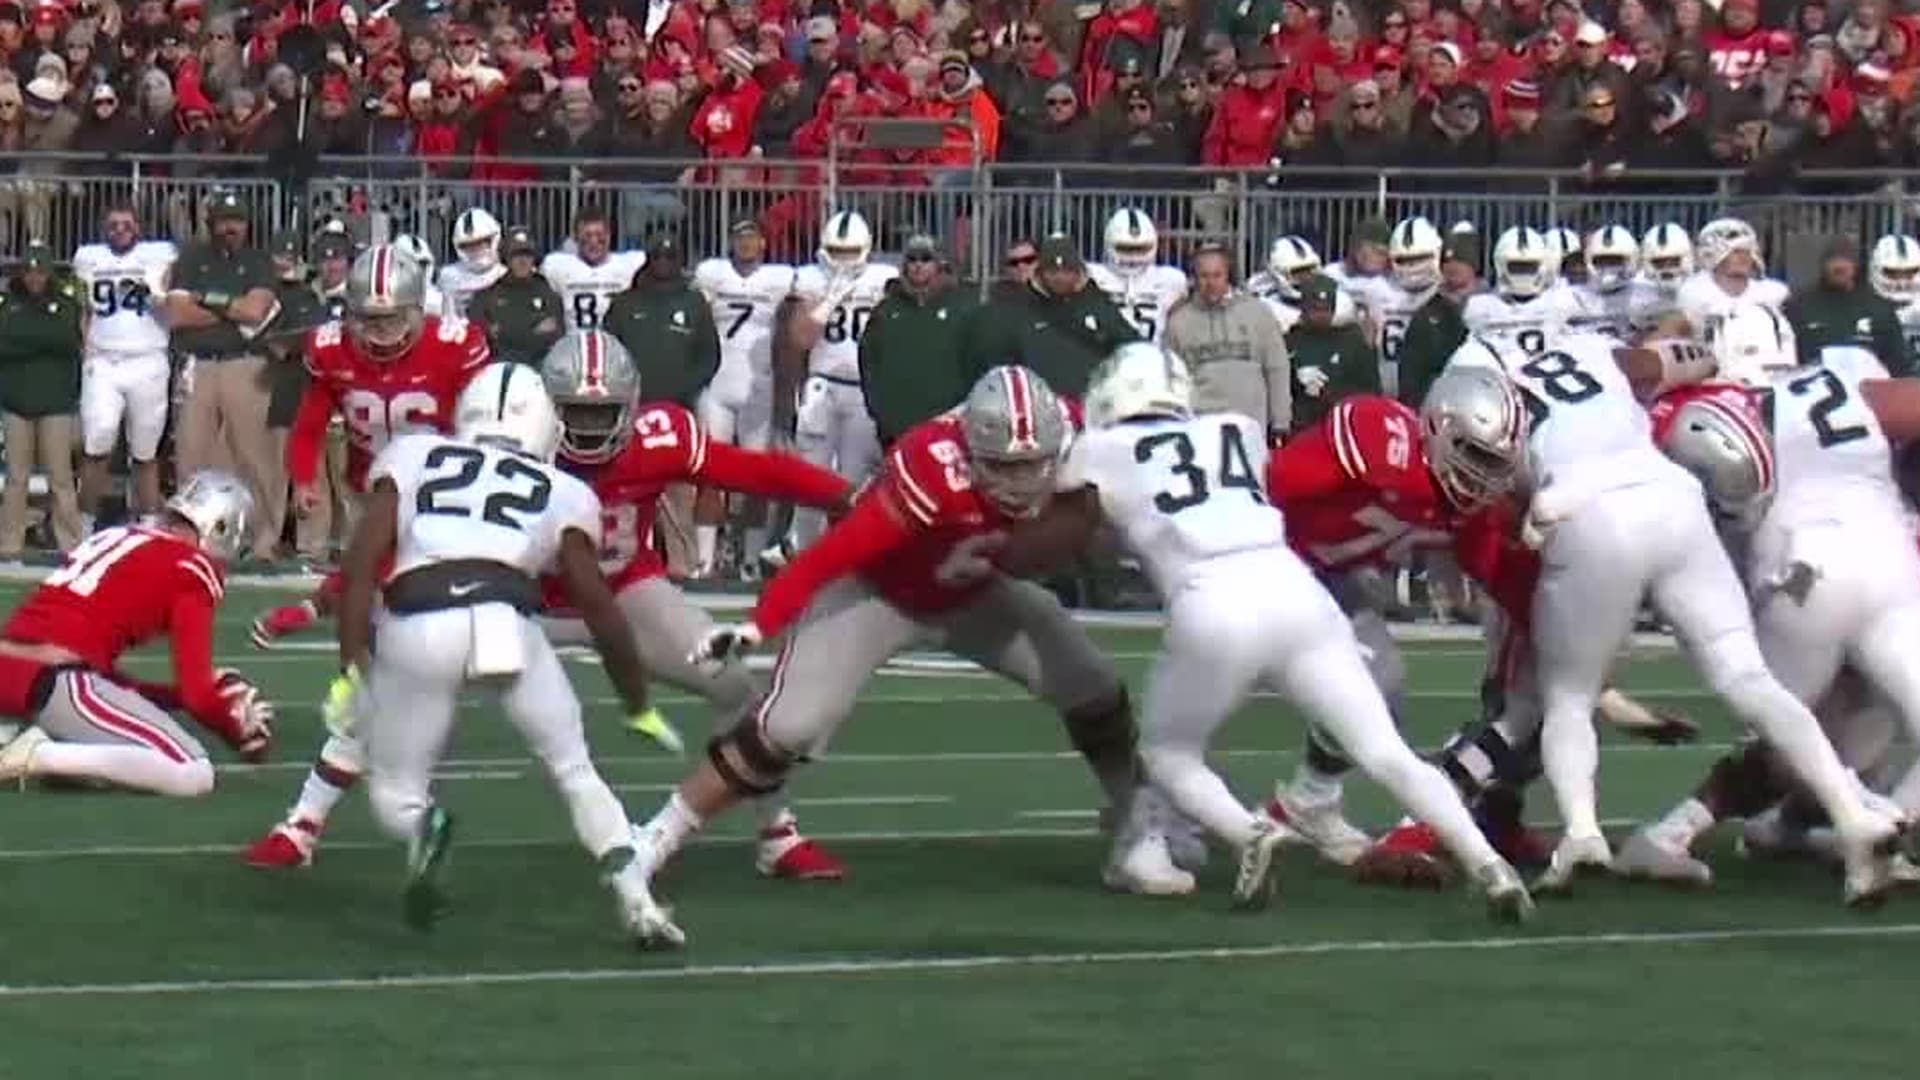 2017 Ohio State Season in Review Backdrop